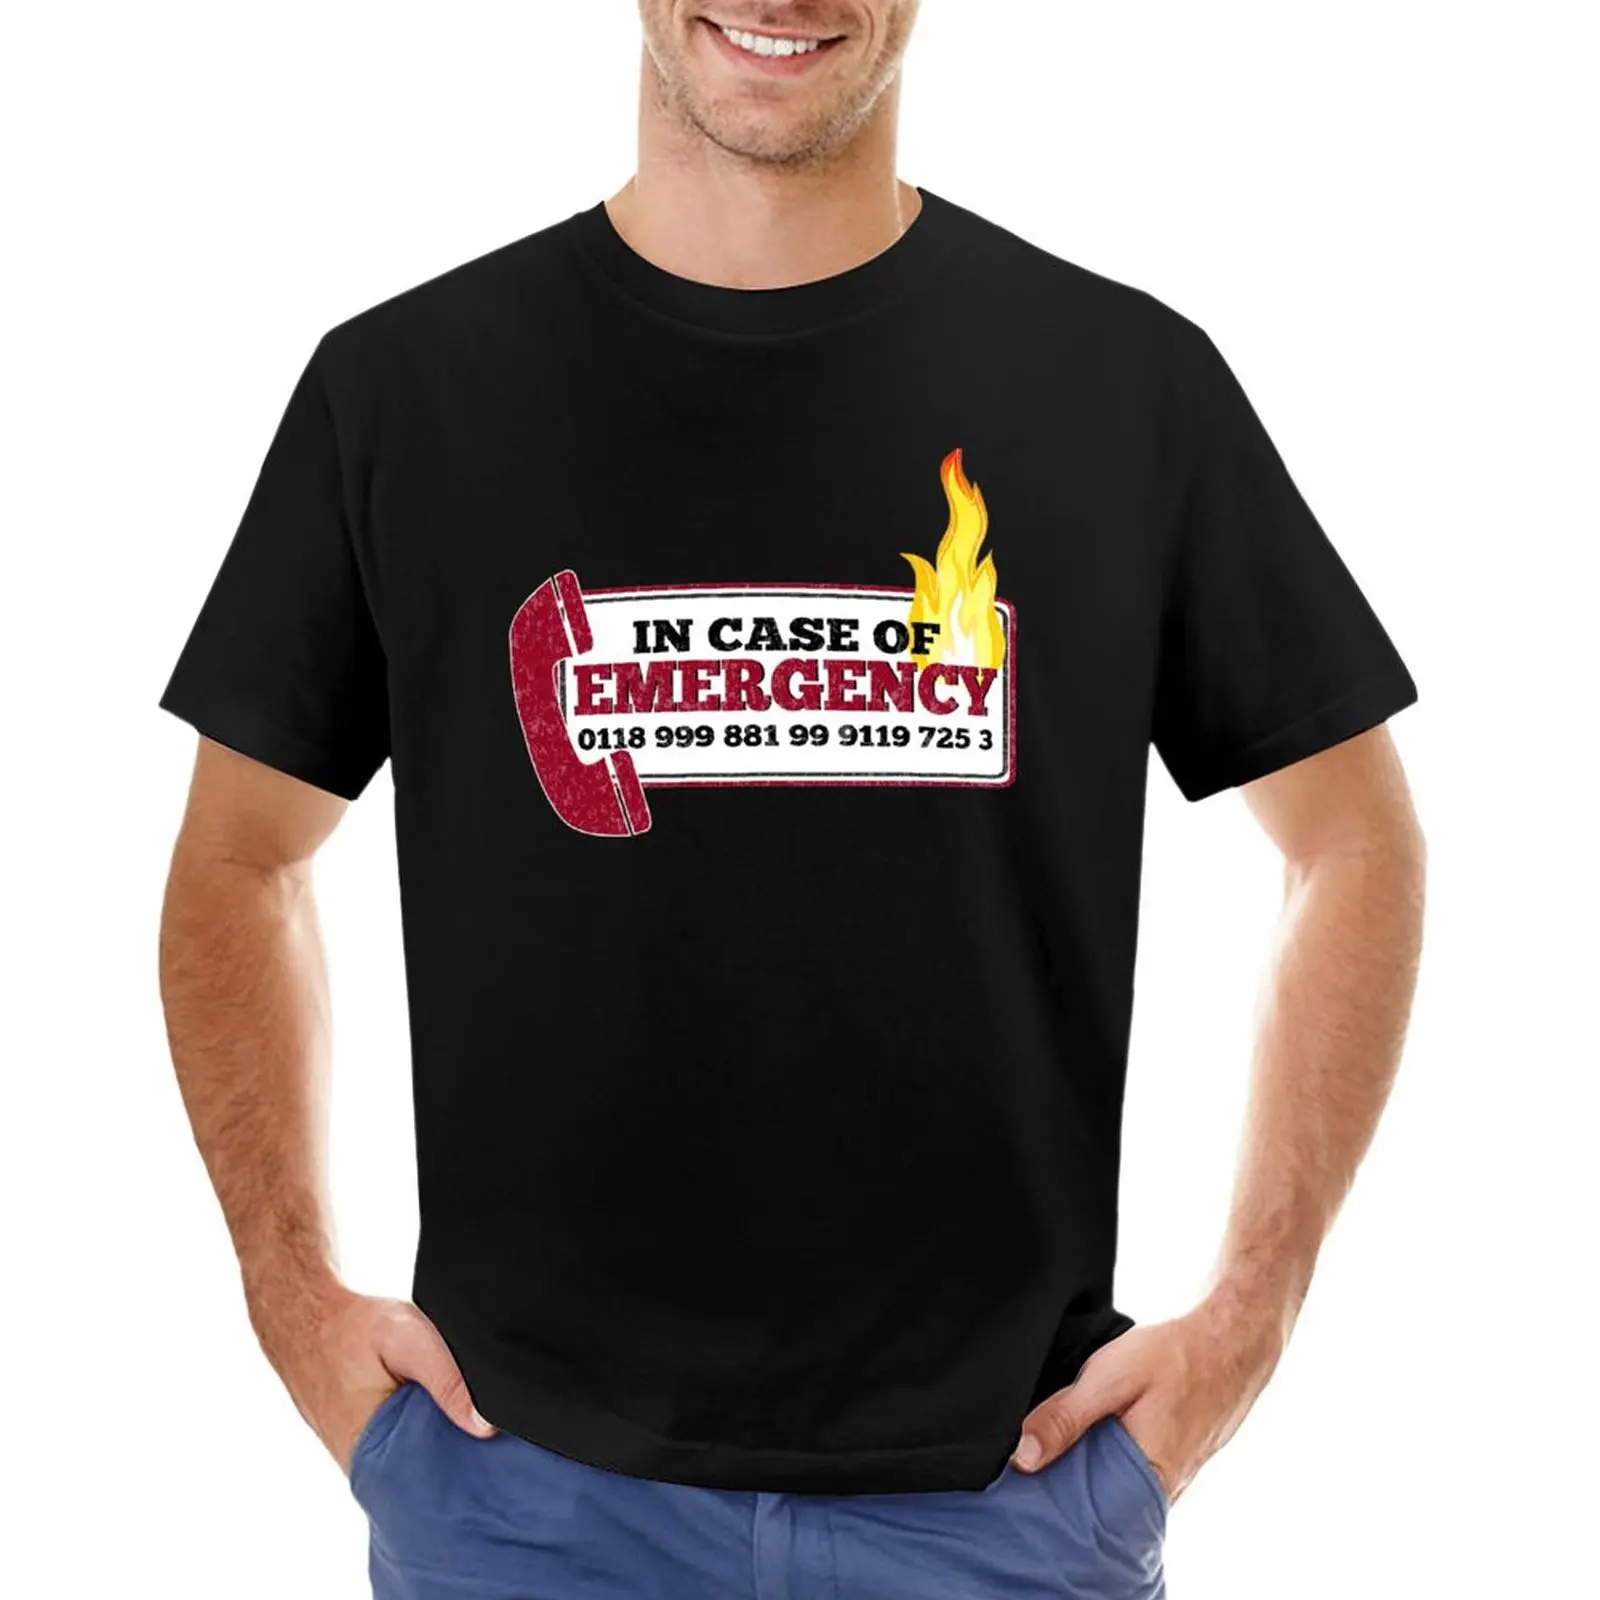 

It Crowd Inspired - New Emergency Number - 0118 999 881 99 9119 725 3 - Moss and the Fire T-Shirt T-shirt short men clothes